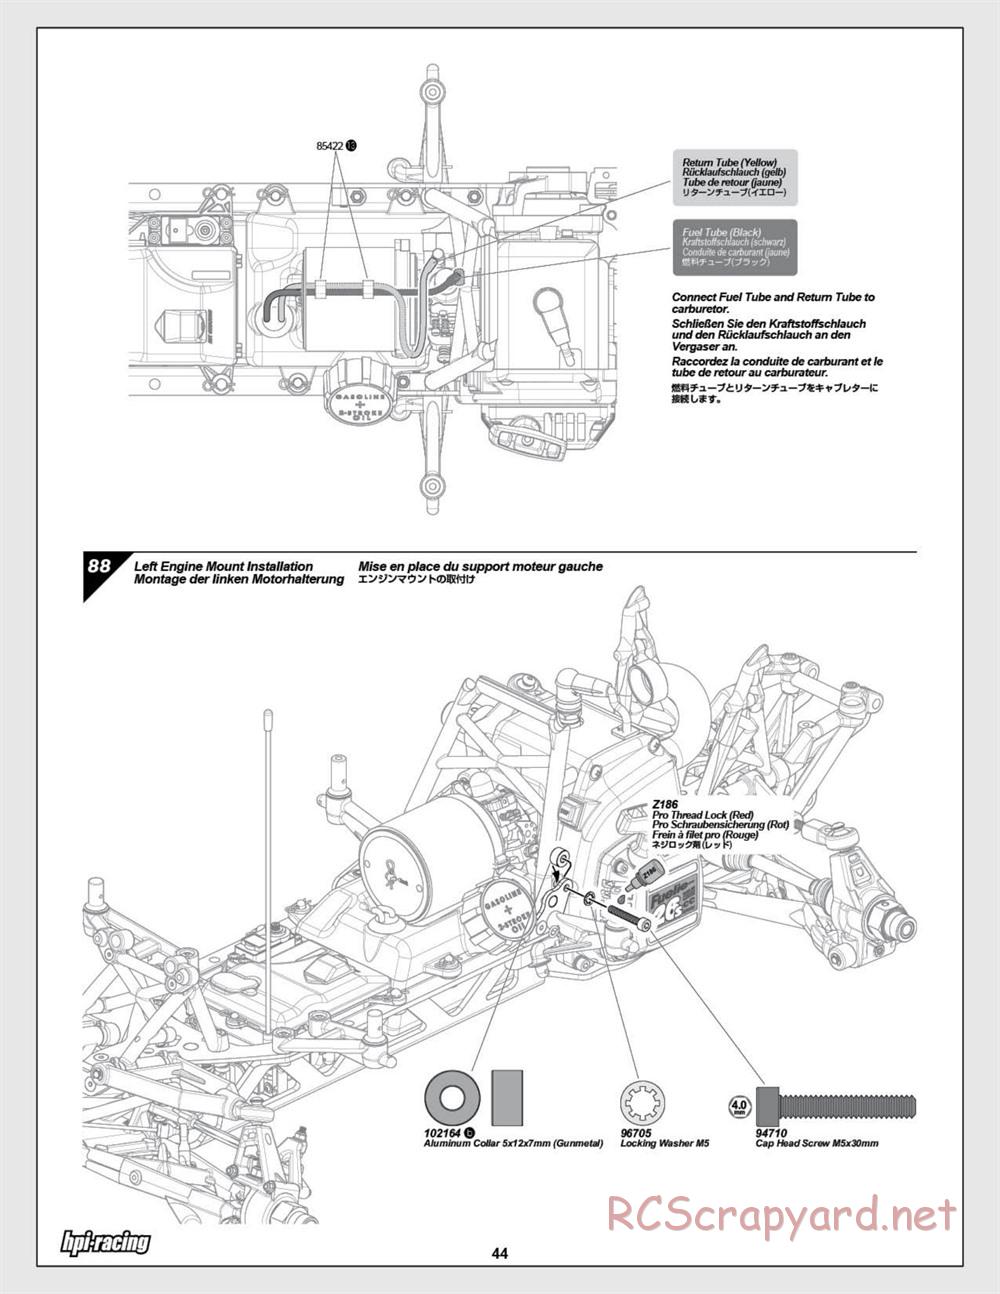 HPI - Baja 5SC SS - Exploded View - Page 44